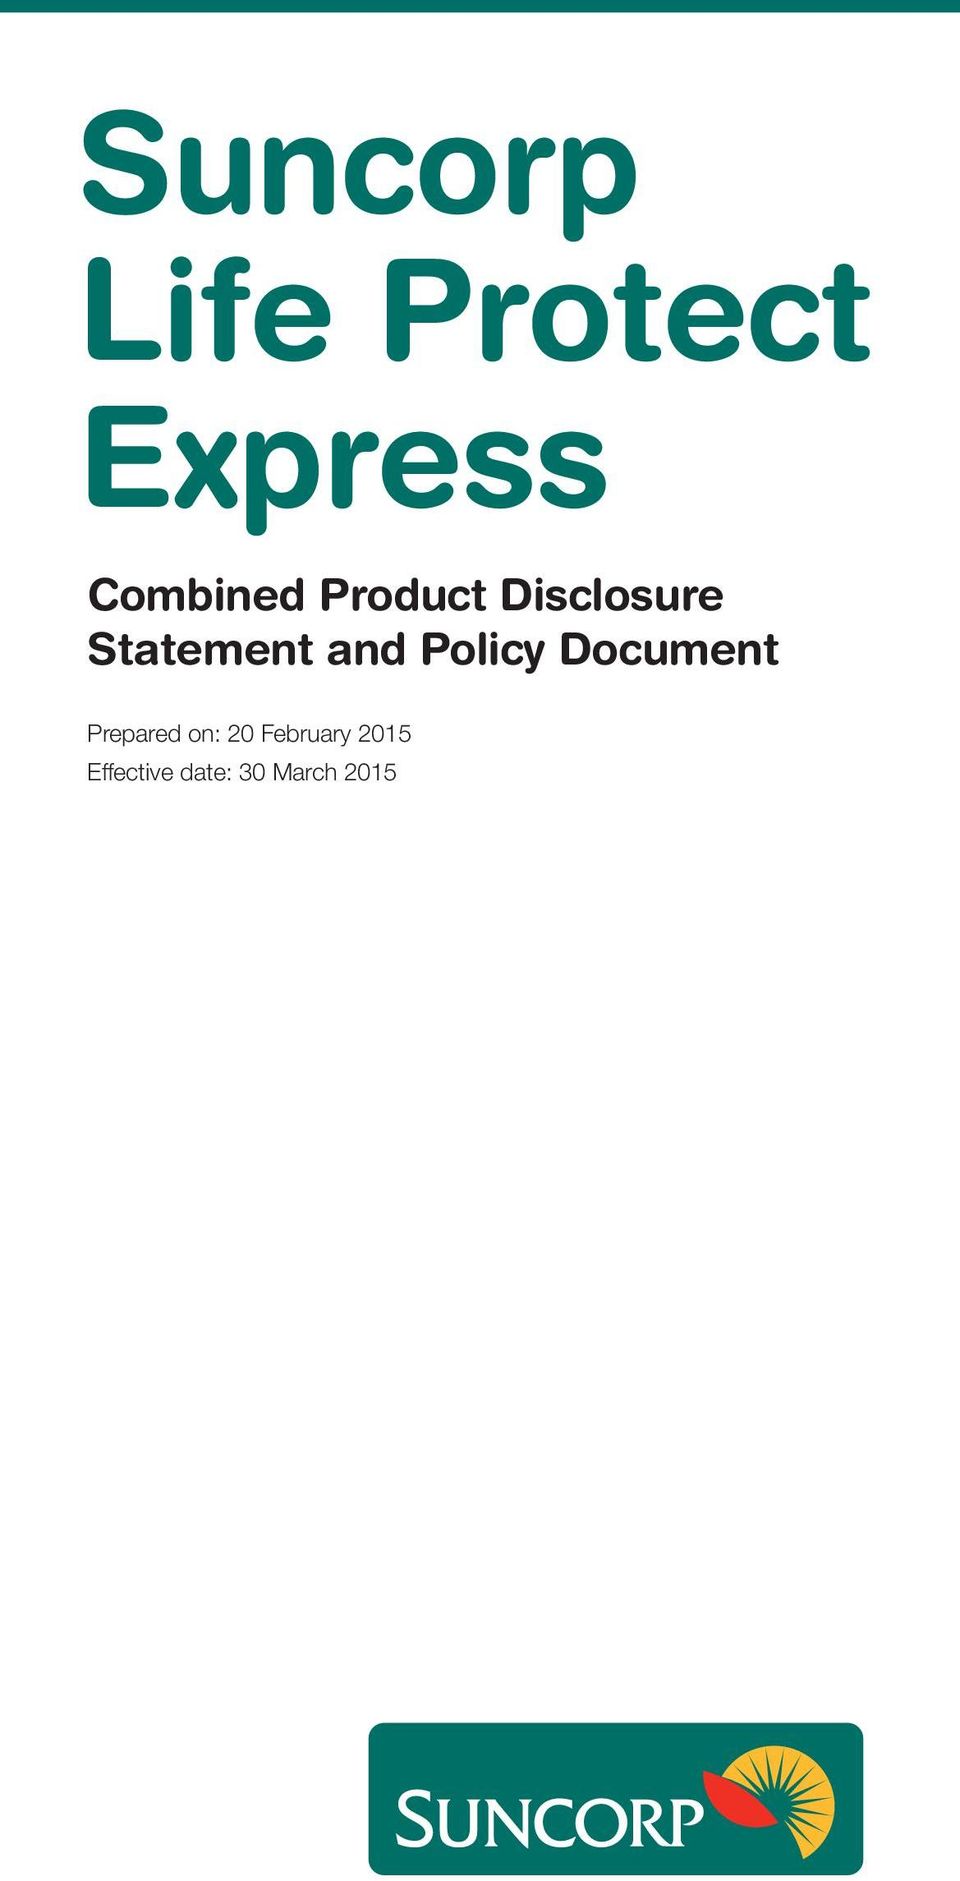 Statement and Policy Document